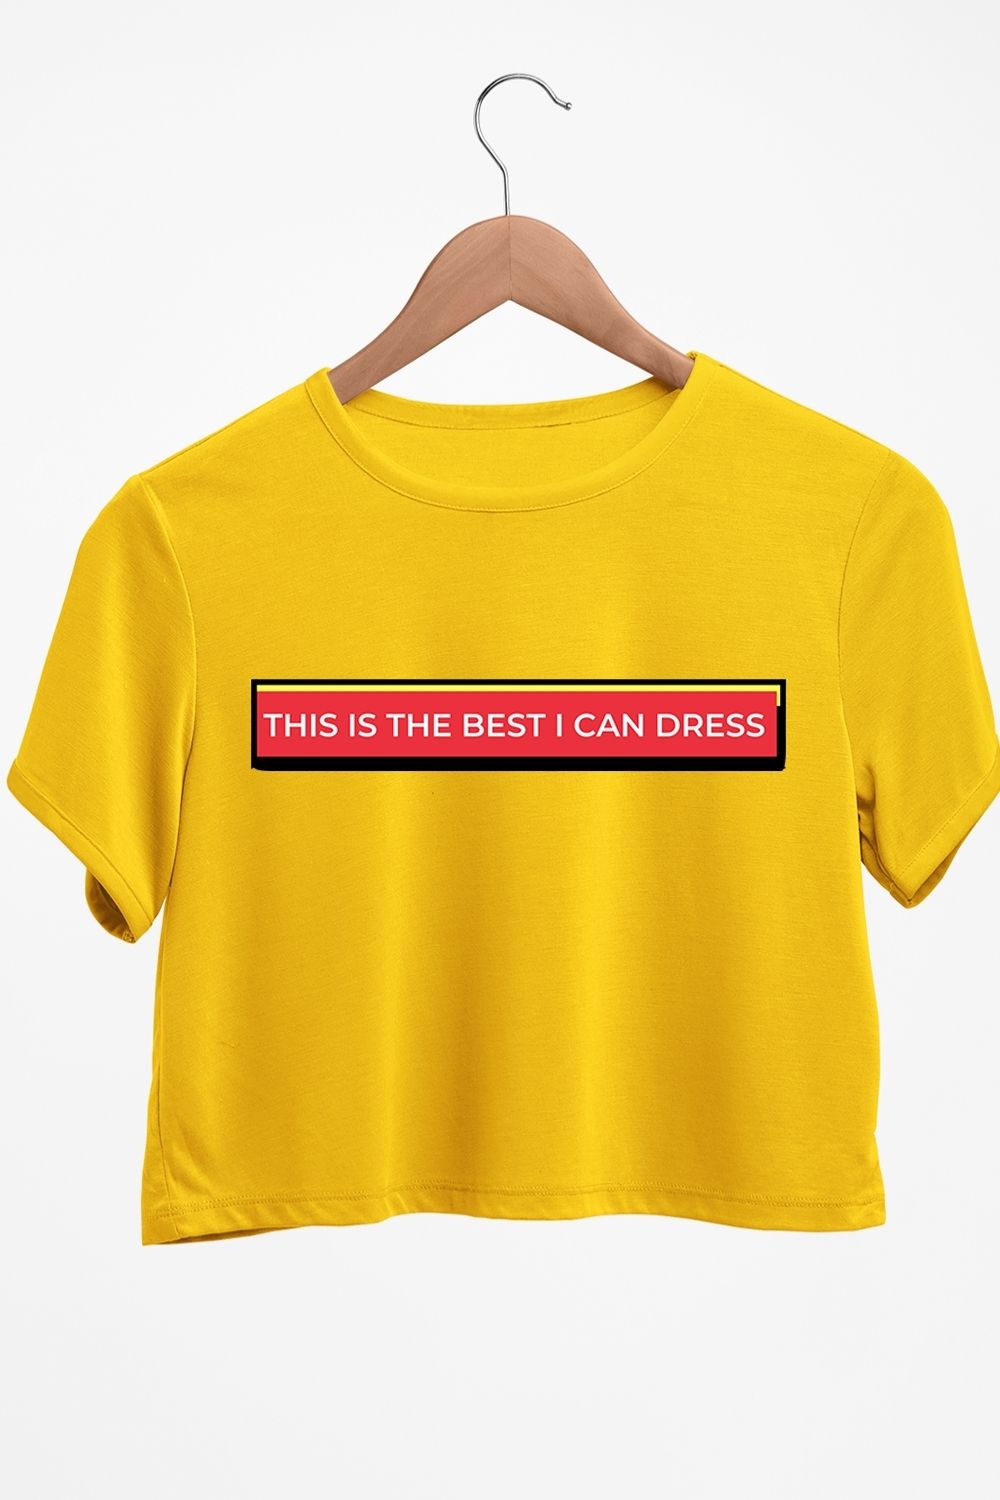 Best I Can Dress Graphic Printed Yellow Crop Top